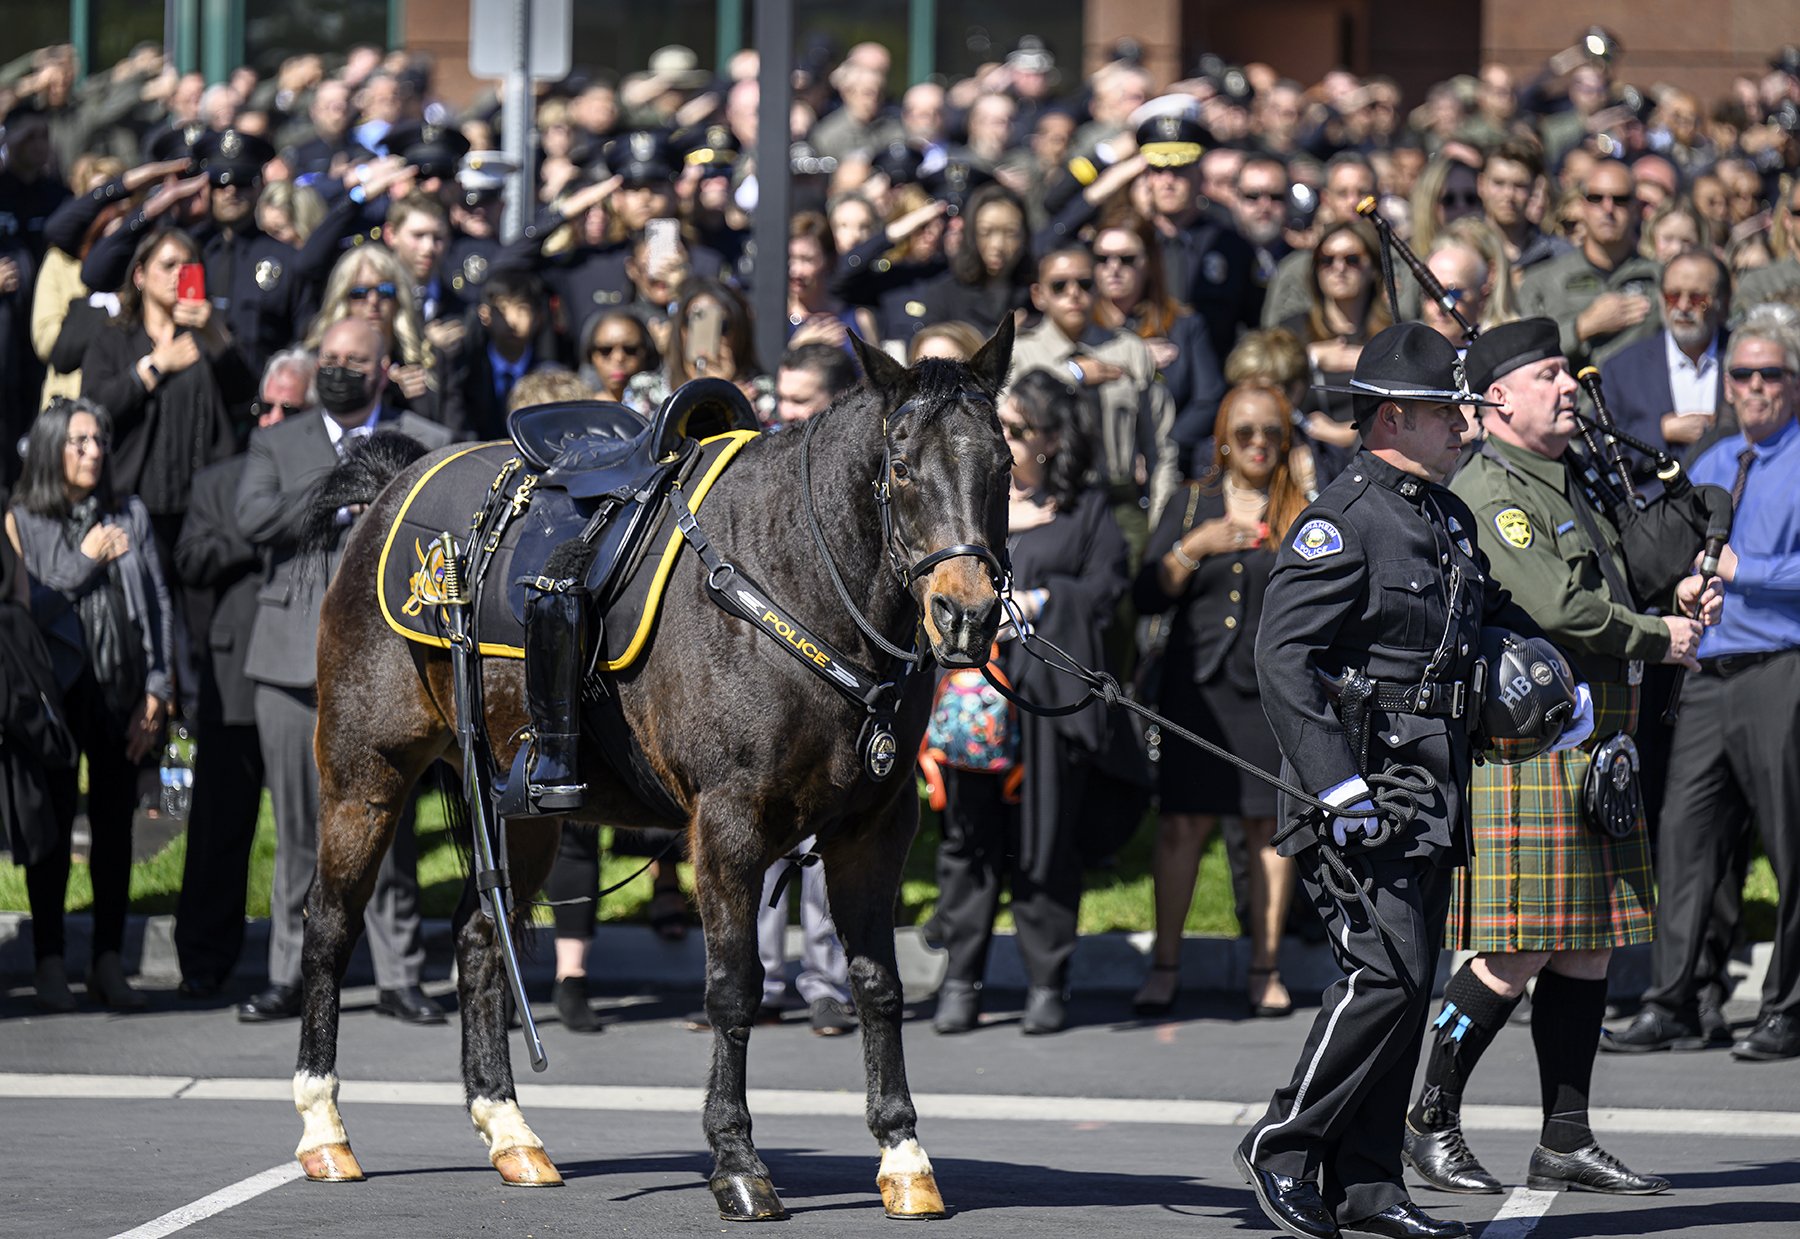  A riderless horse with reversed boots symbolizes the last ride of fallen officer Nicholas Vella who died in a helicopter crash Feb. 19 off the waters in Newport Beach. Funeral services took place at the Honda Center in Anaheim on Tuesday, March 8, 2